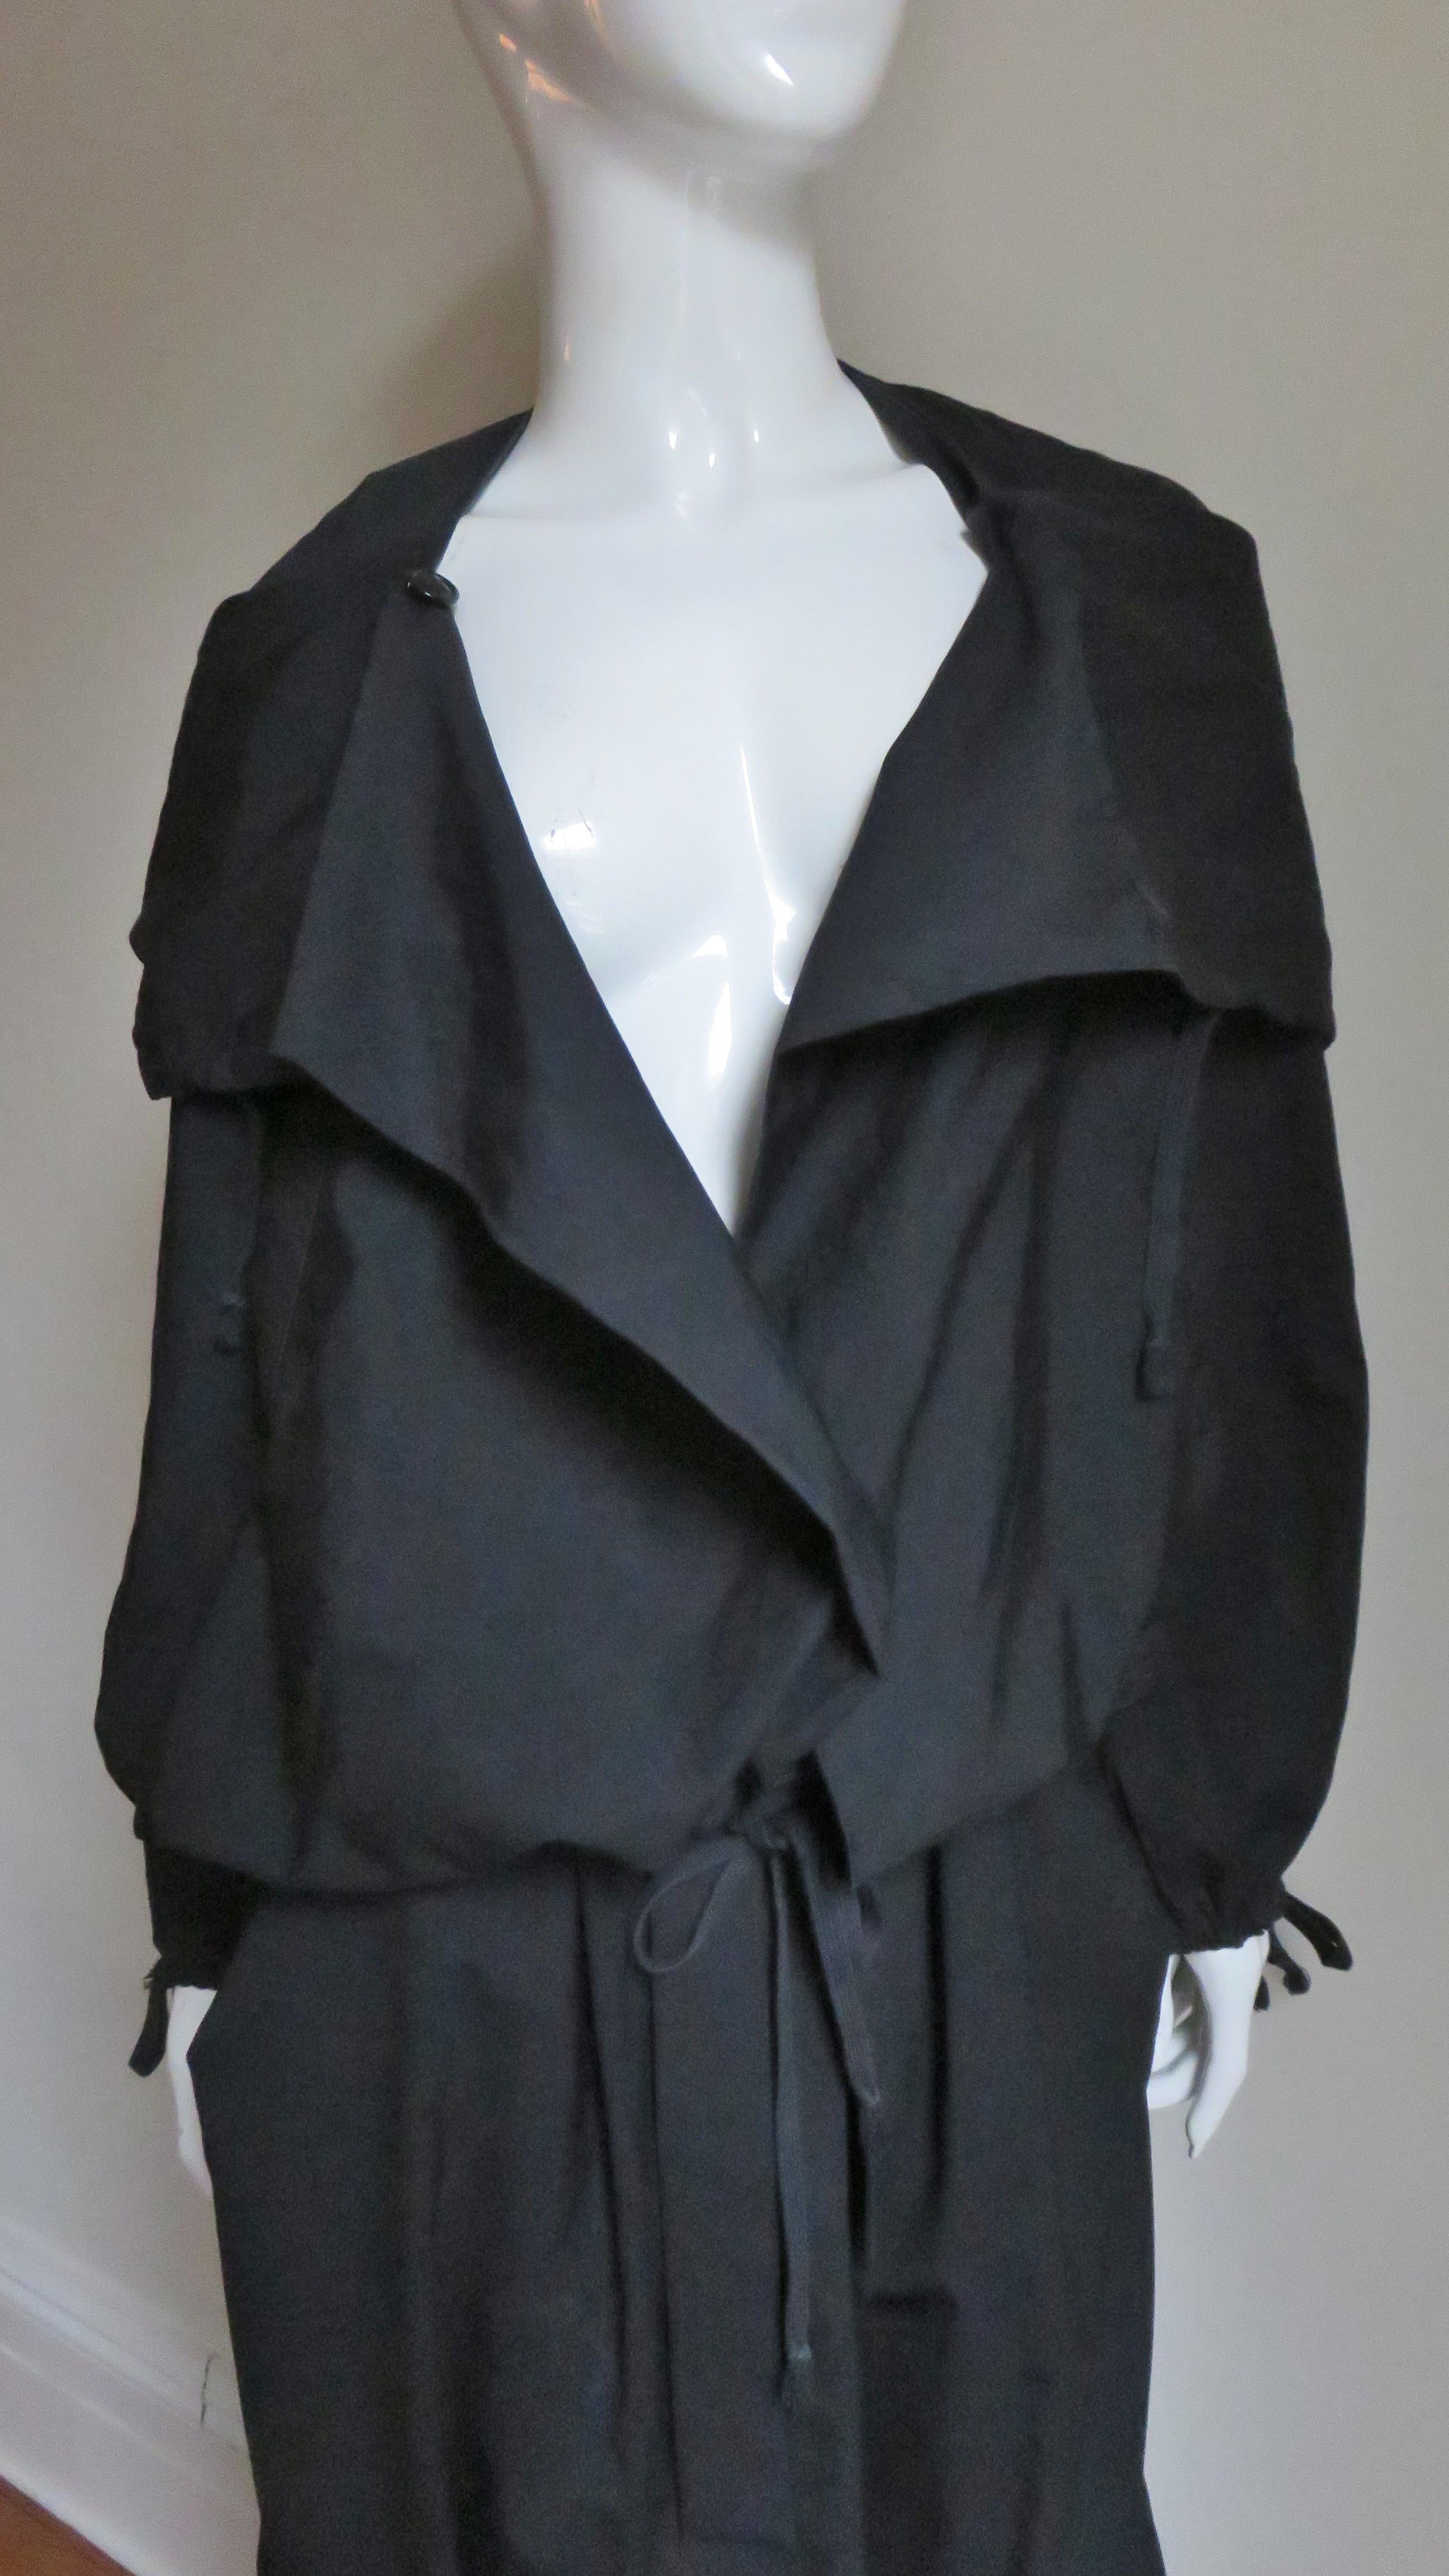 This is a fabulous set from in a black wool cotton blend from Vivienne Westwood.  It consists of drop crotch harem style pants gathering onto a waistband. There is draping on the front and along the legs and side seam pockets.  The jacket has